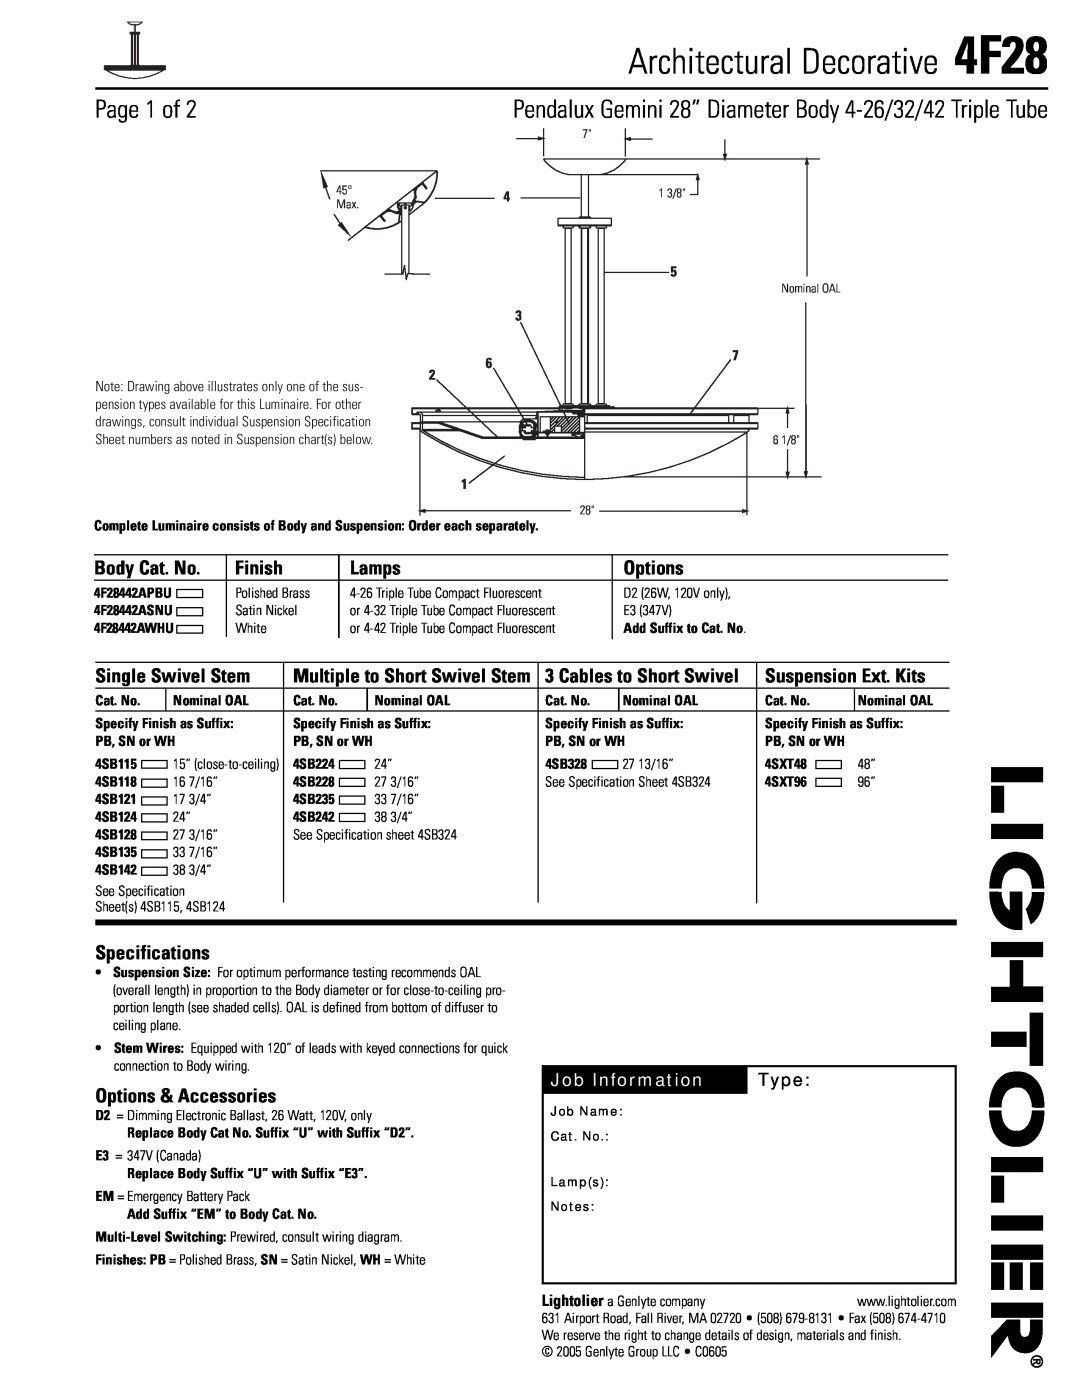 Lightolier specifications Architectural Decorative 4F28, Page 1 of, Body Cat. No, Finish, Lamps, Options, Type, 4 3 6 